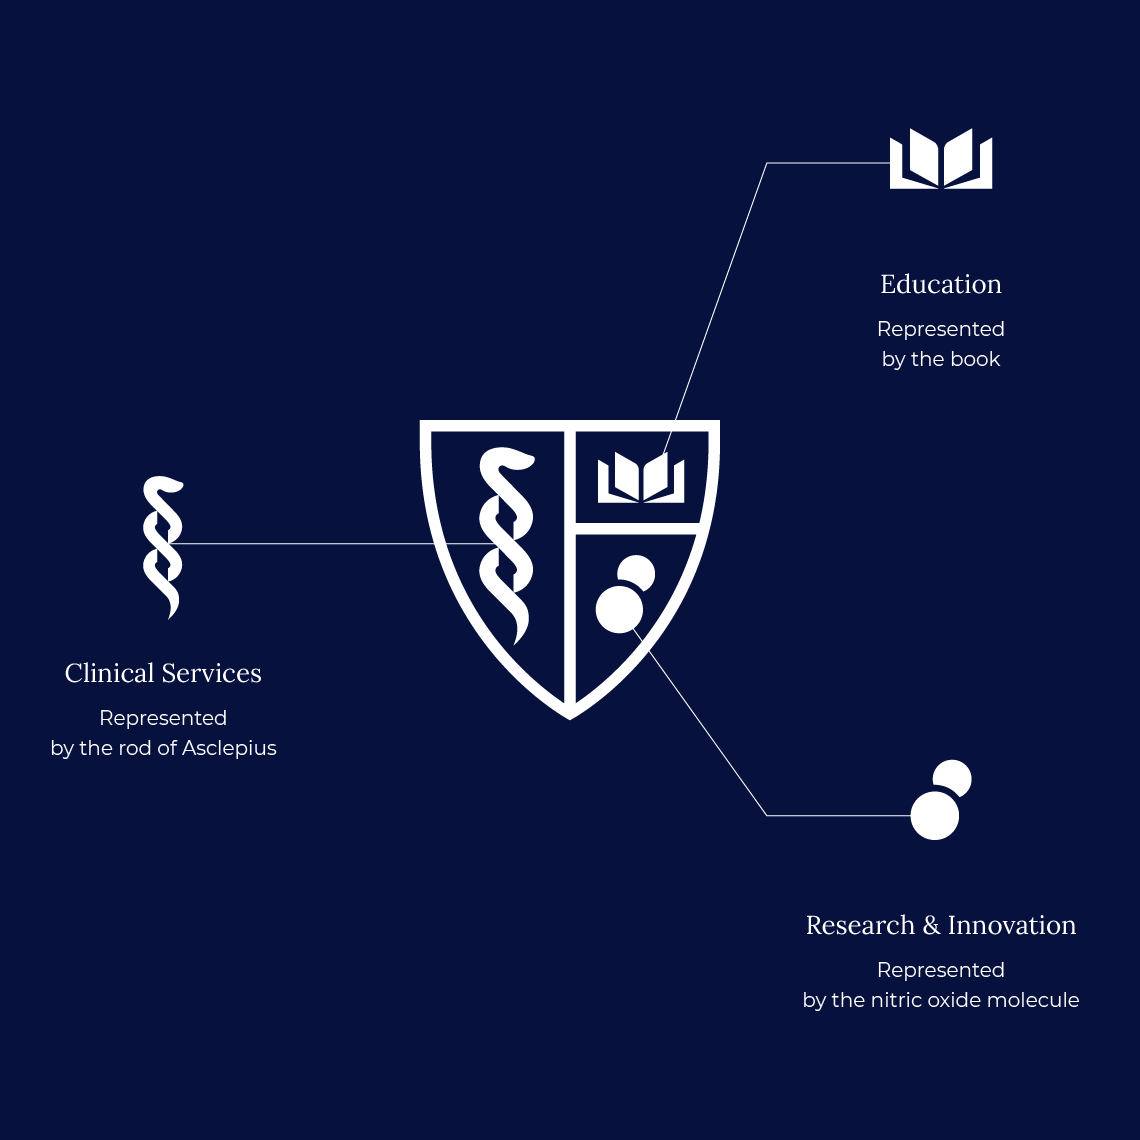 The new logo and it's components explained: MBLM designed a modernized shield that highlighted Downstate’s focus on research, education, and care, to reinvigorating this Medical Center and University